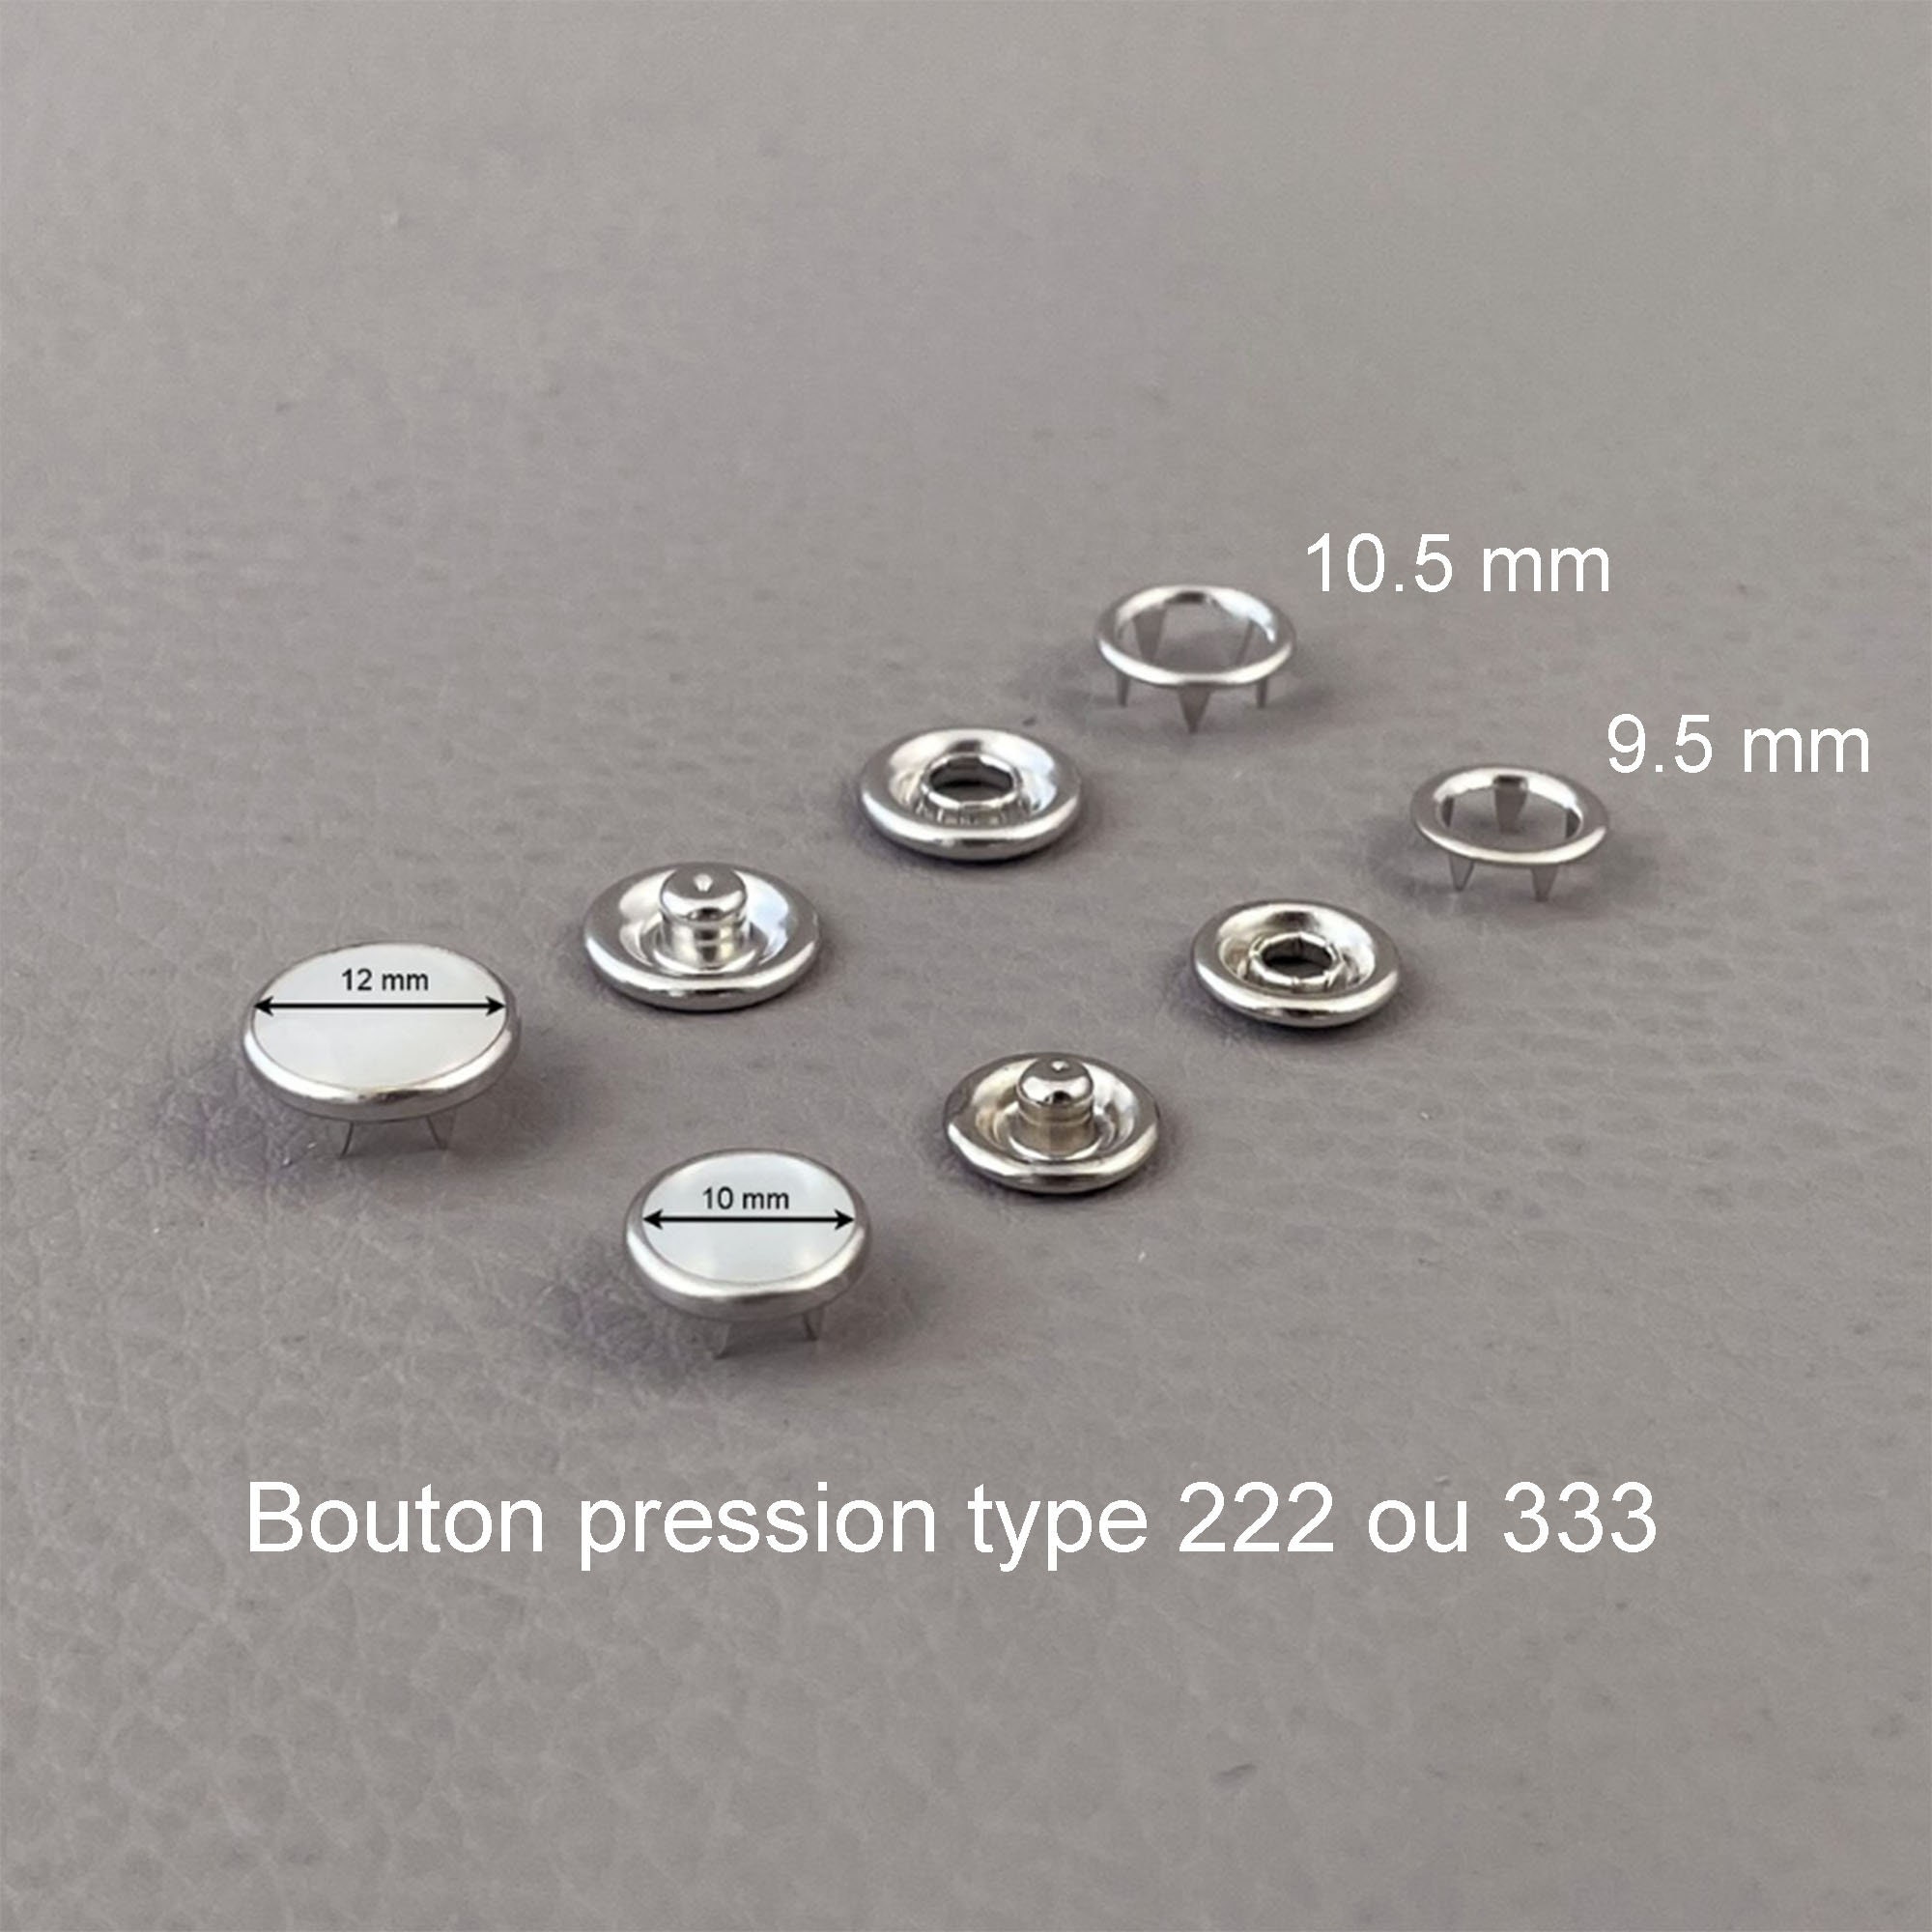 Metal Purse Snap Bouton Pression Buttons for DIY Sewing Gifts